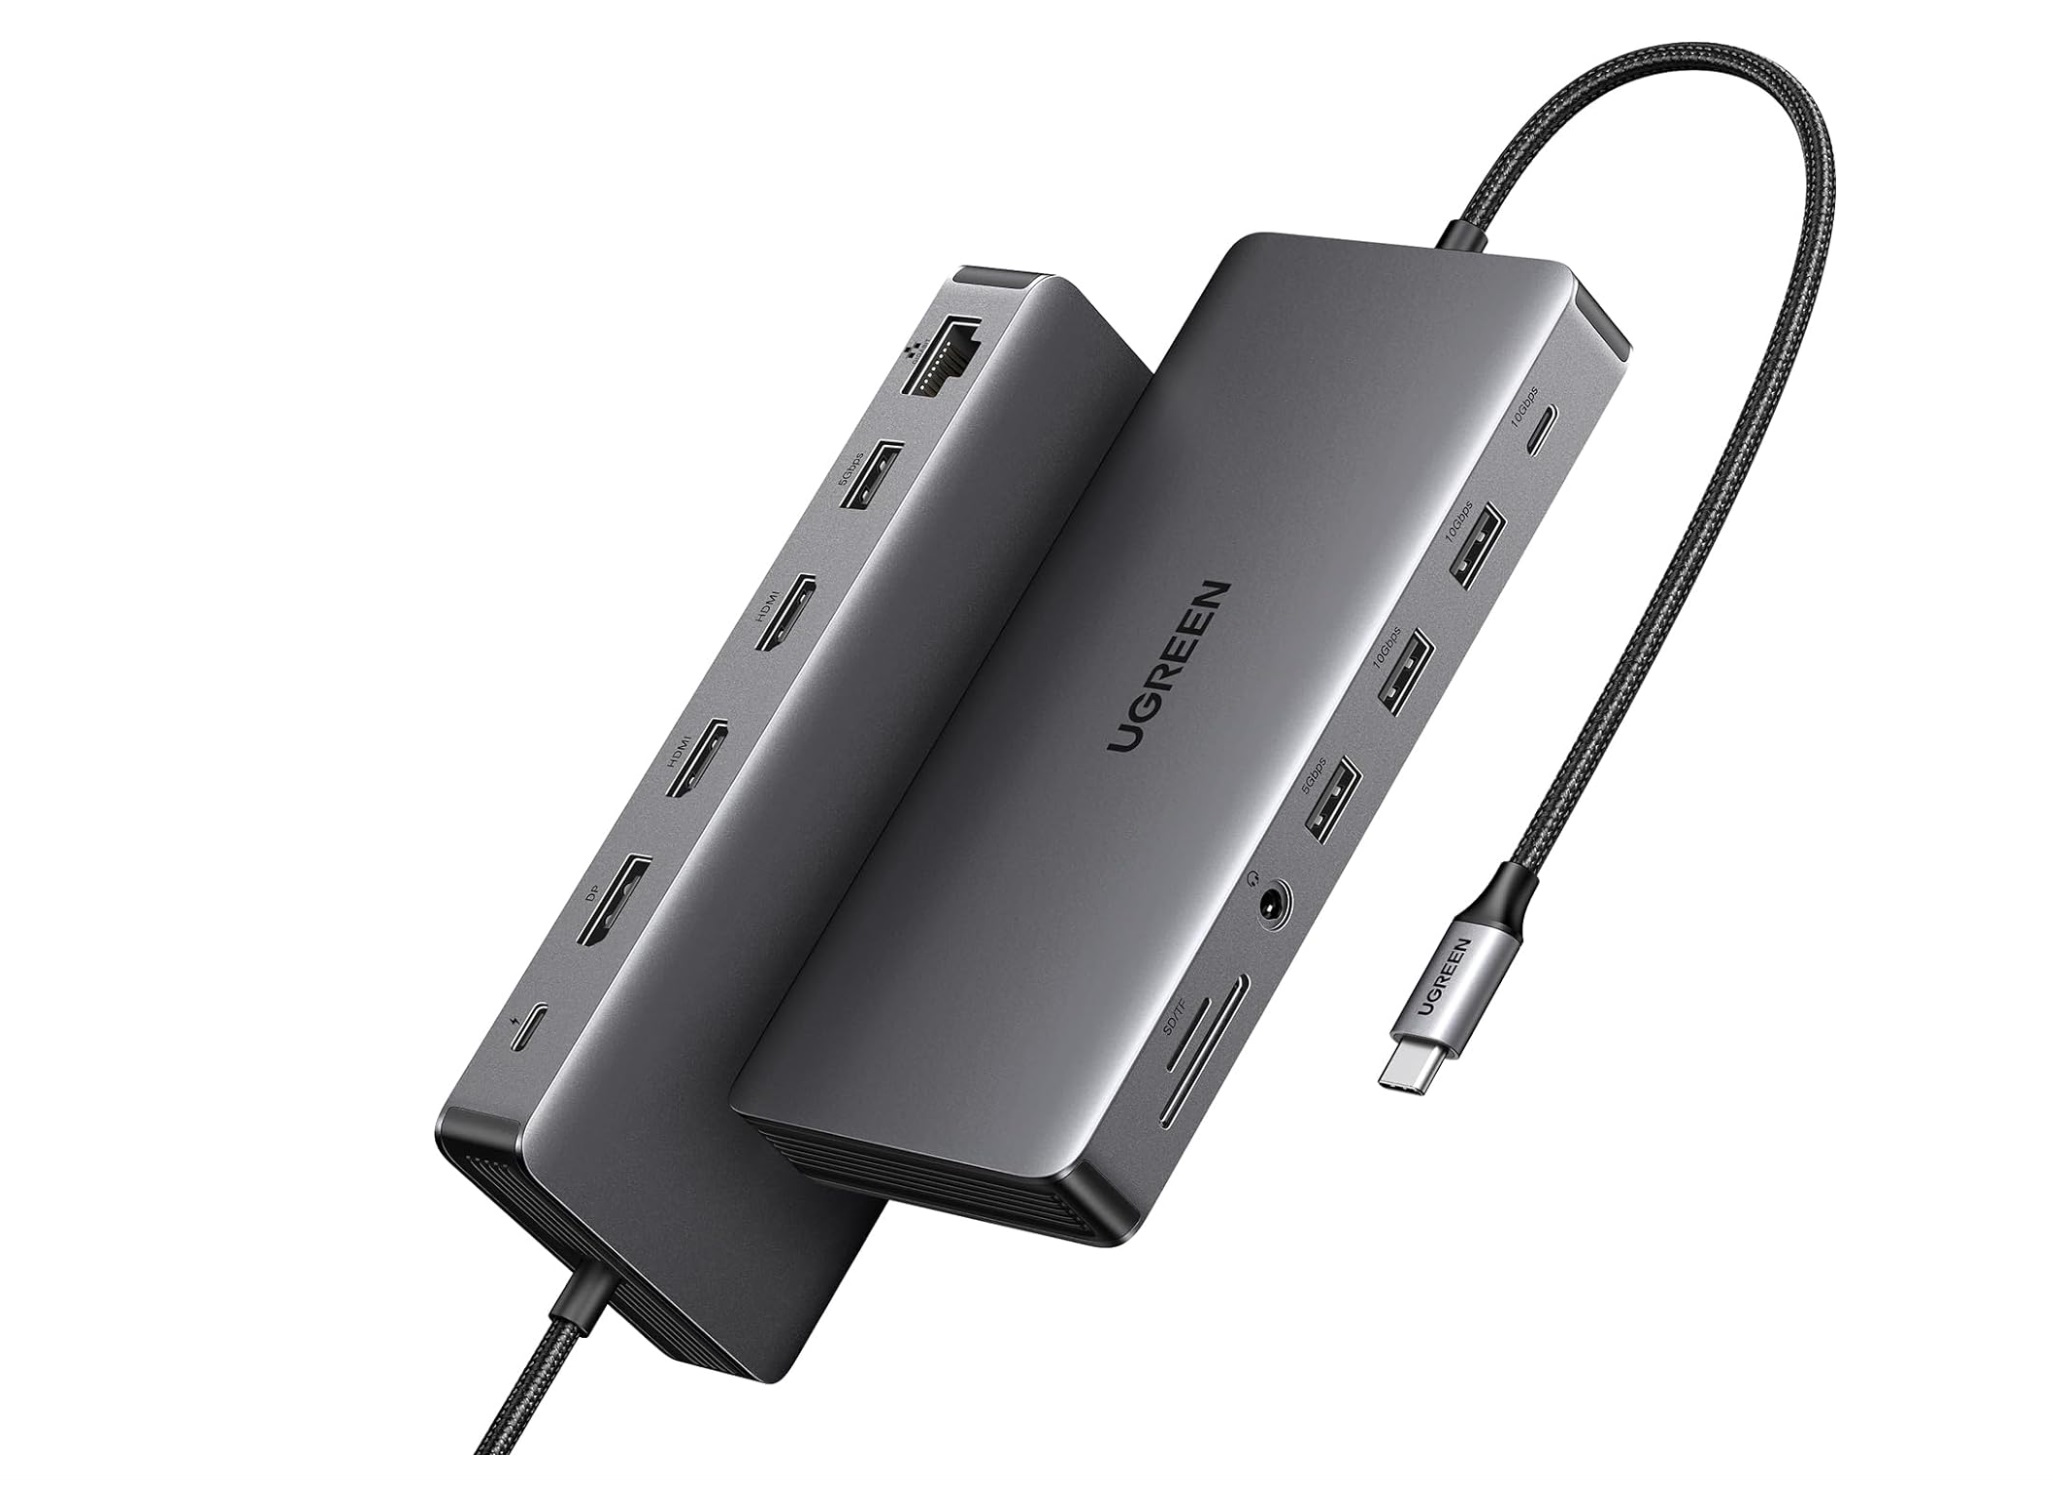 I'm looking for a dock that allows connection to a portable